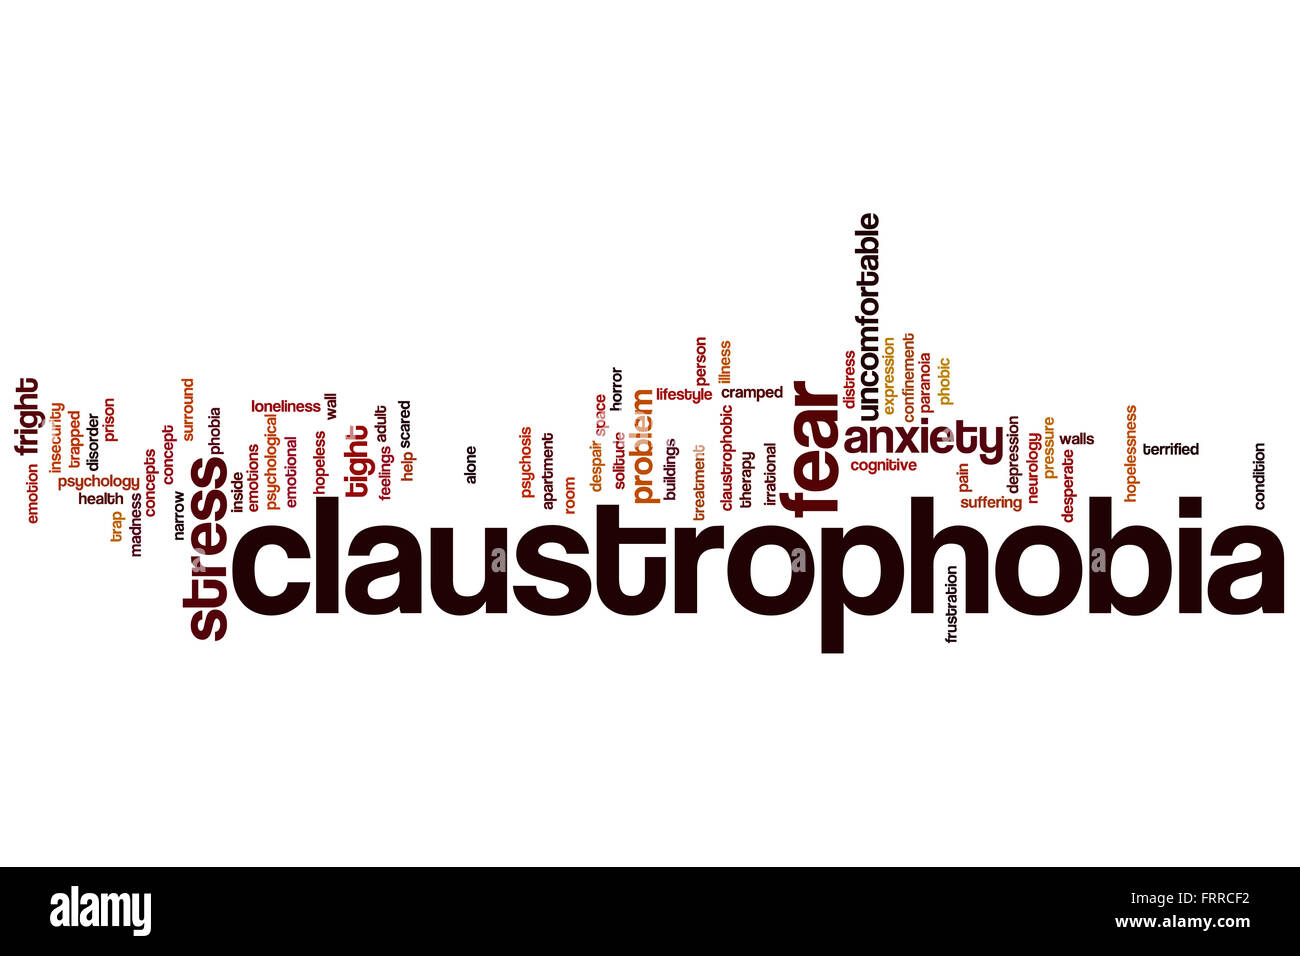 Claustrophobia concept word cloud background Stock Photo